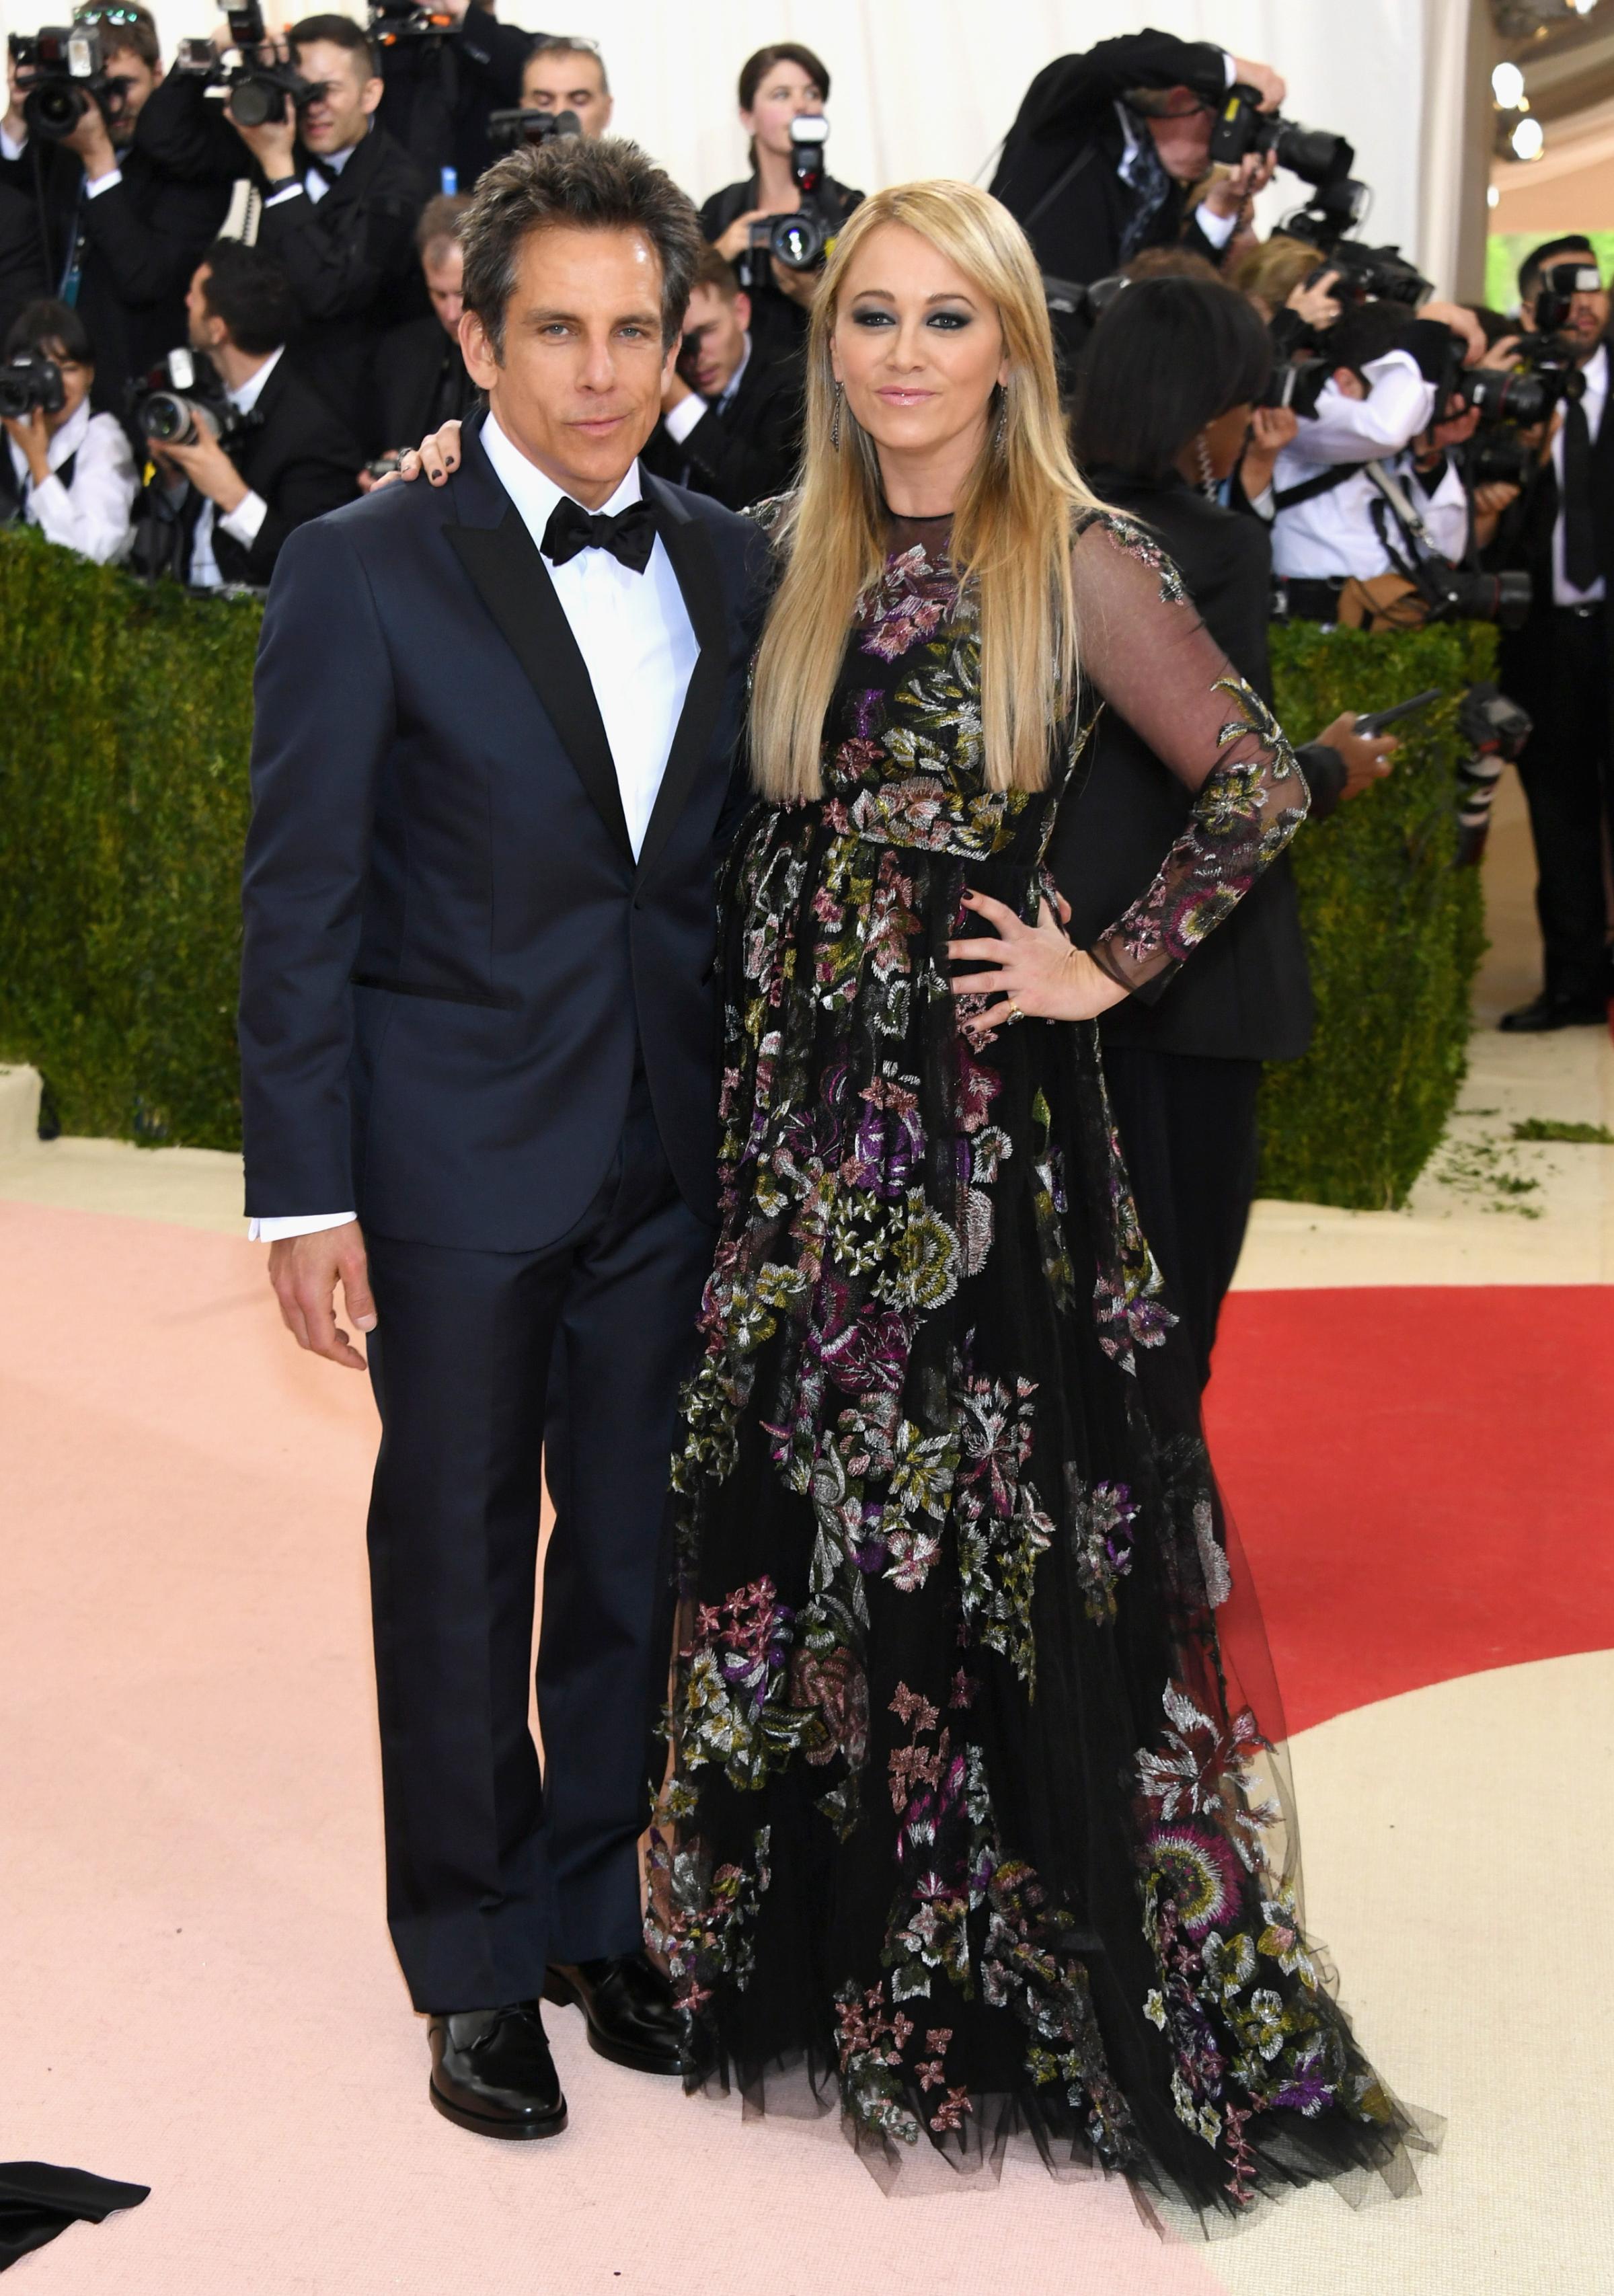 Ben Stiller and Christine Taylor attend "Manus x Machina: Fashion In An Age Of Technology" Costume Institute Gala at Metropolitan Museum of Art on May 2, 2016 in New York City.